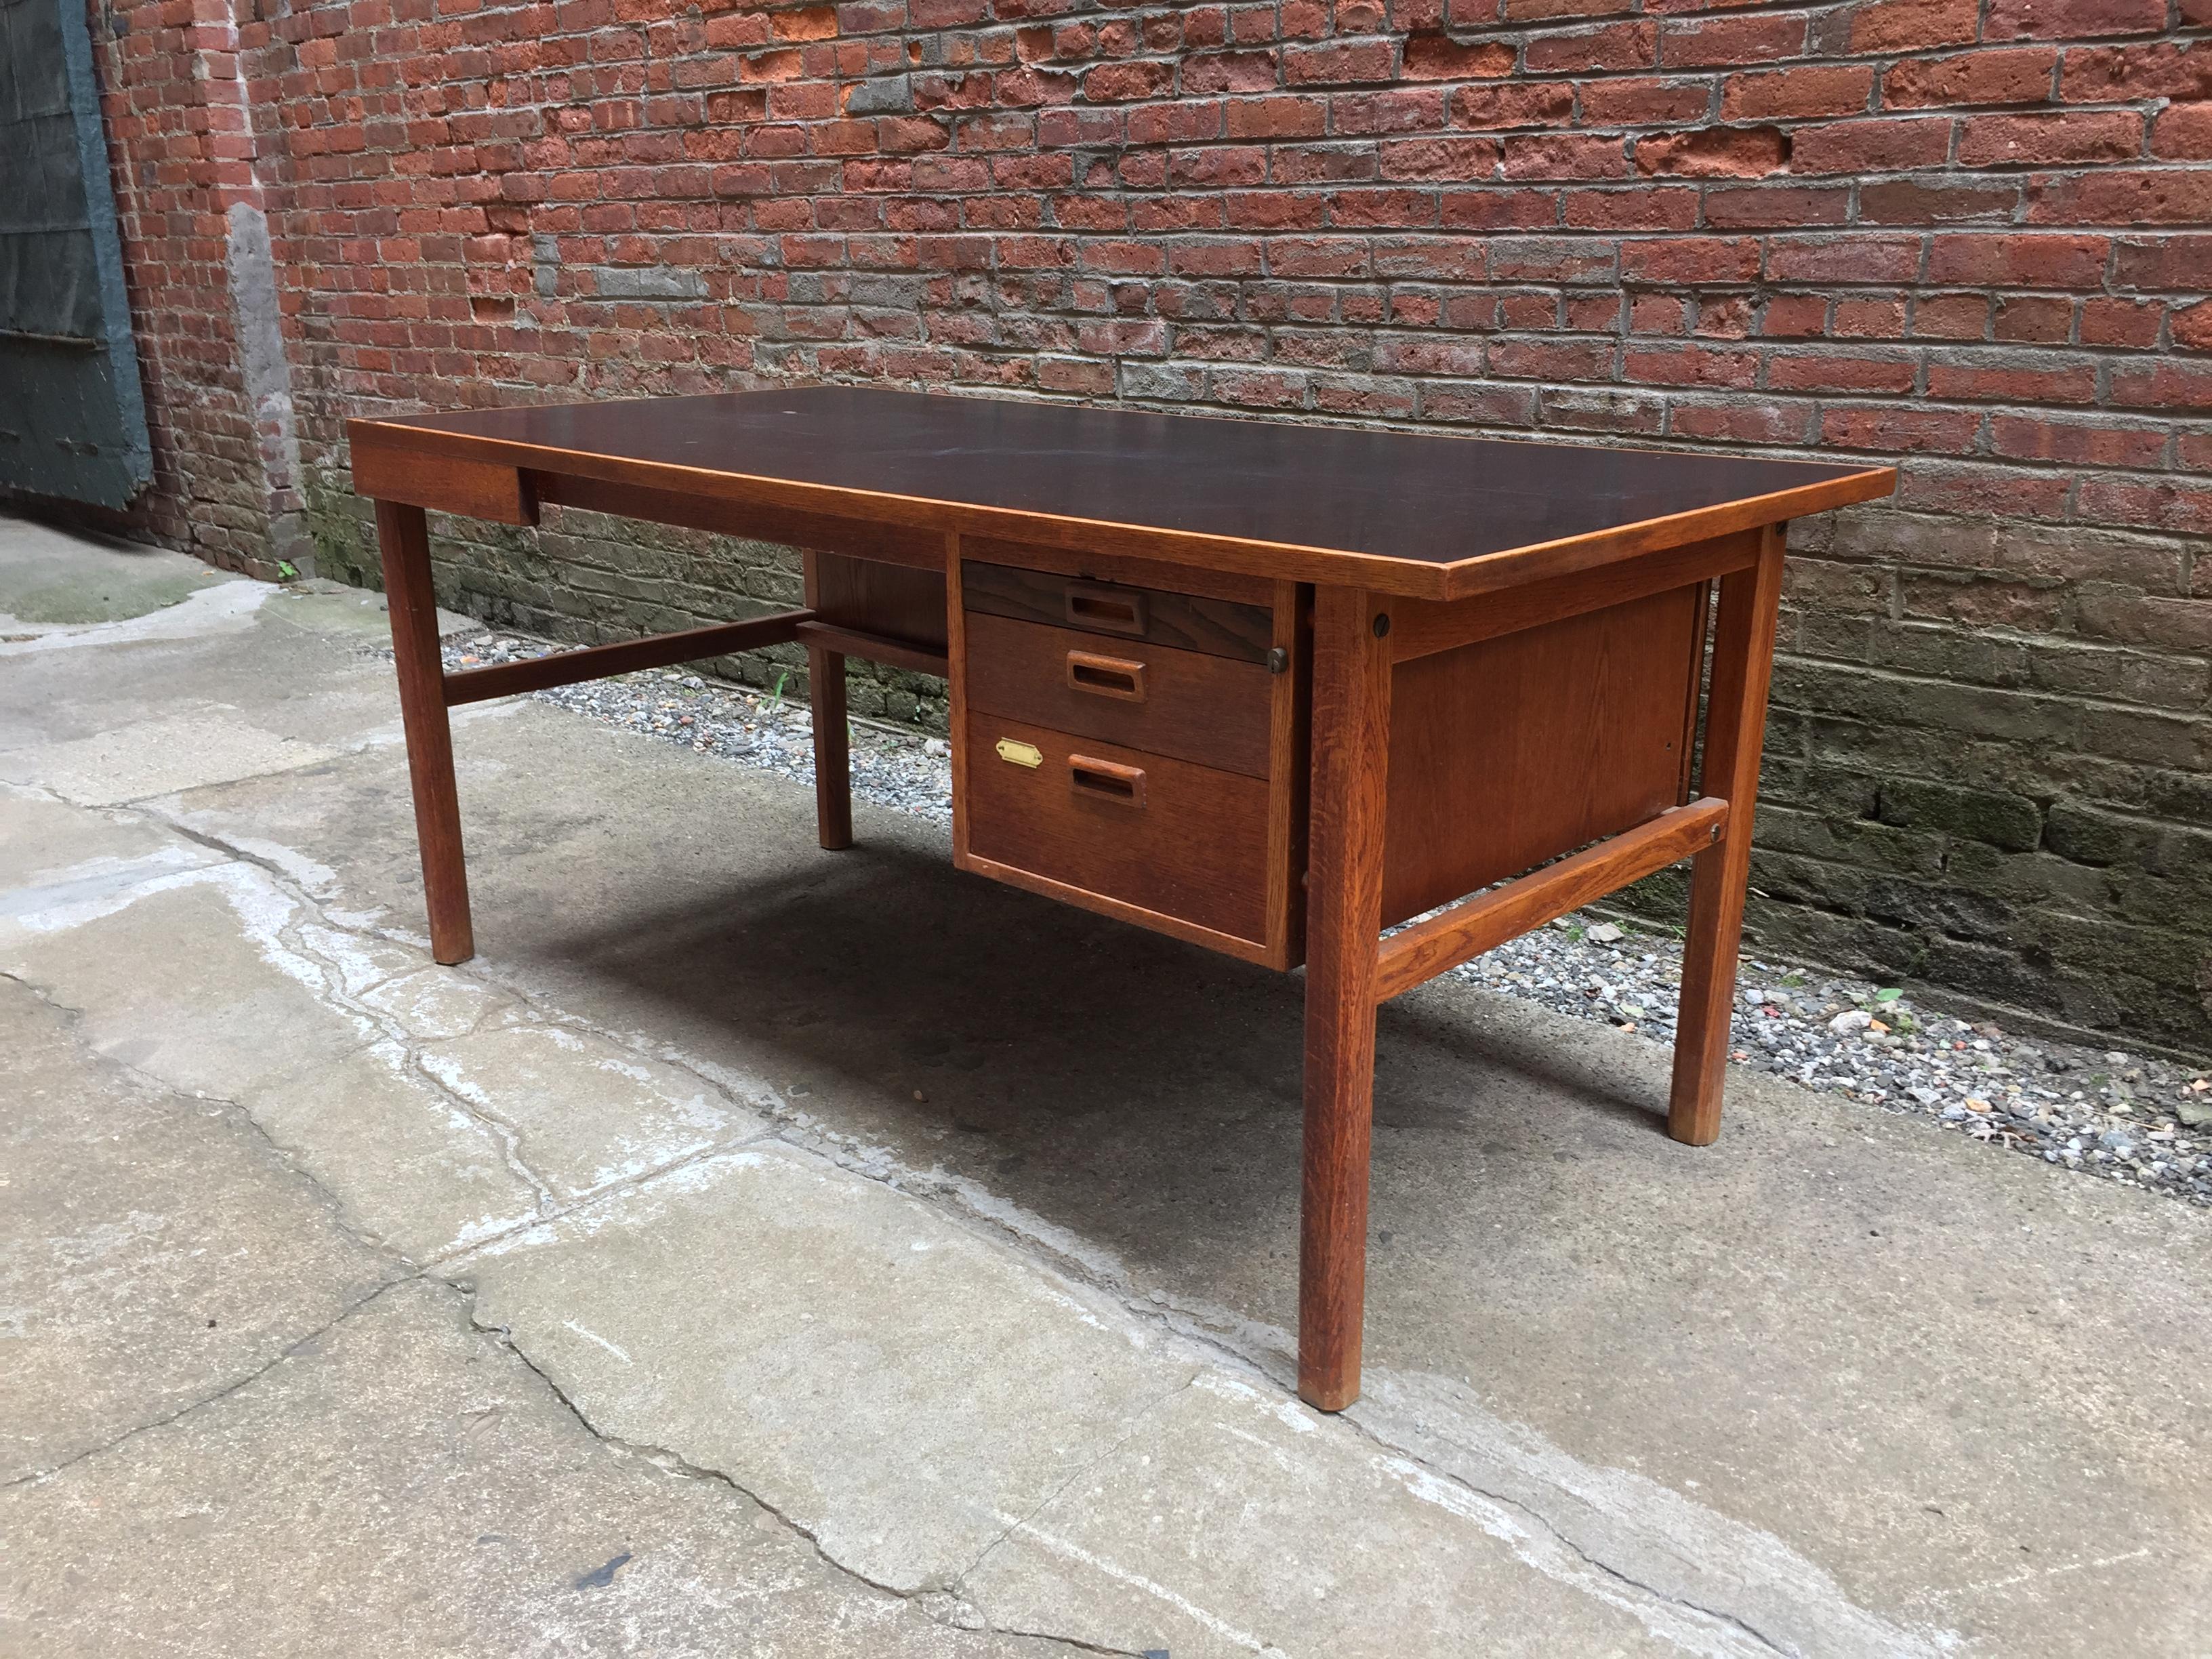 Solid oak frame with a black laminate top. Beautiful old growth tight grain. Three graduated drawers with many options due to the size of the flat surface, circa 1960. Original finish. Good condition with some minor light scratches on the black